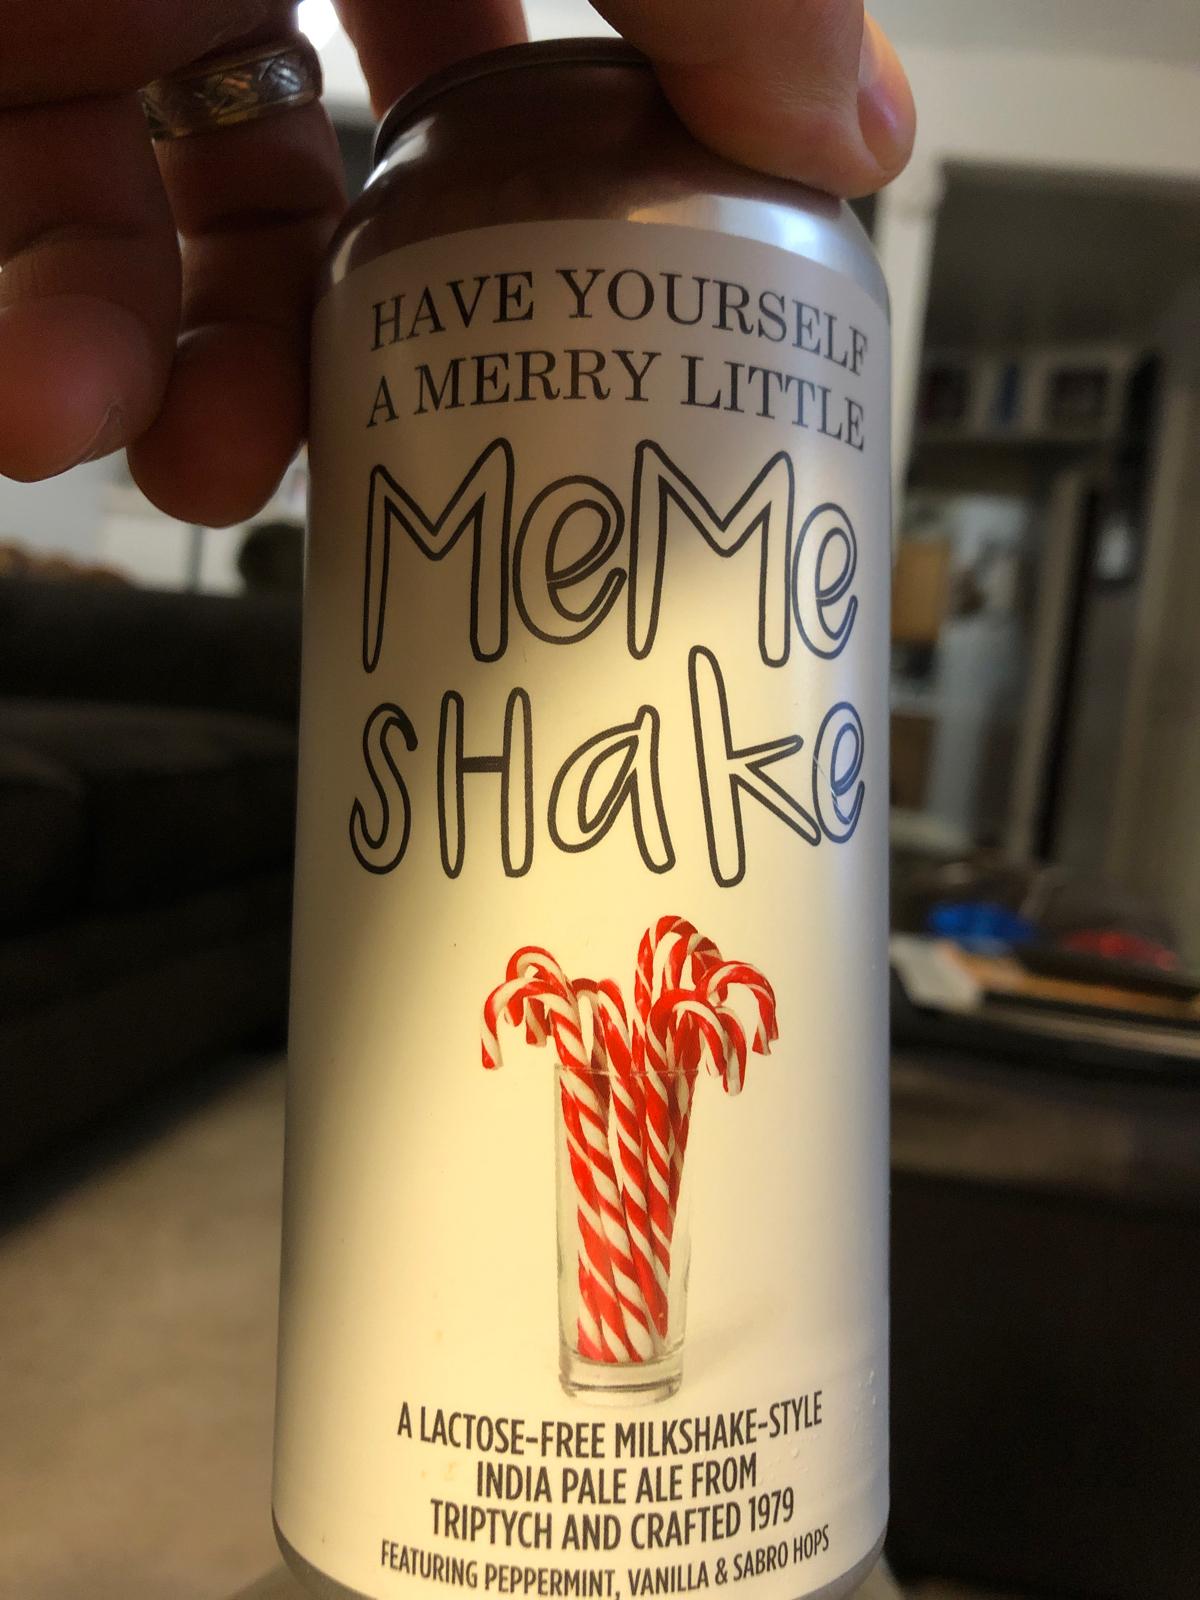 Have Yourself A Merry Little Meme Shake